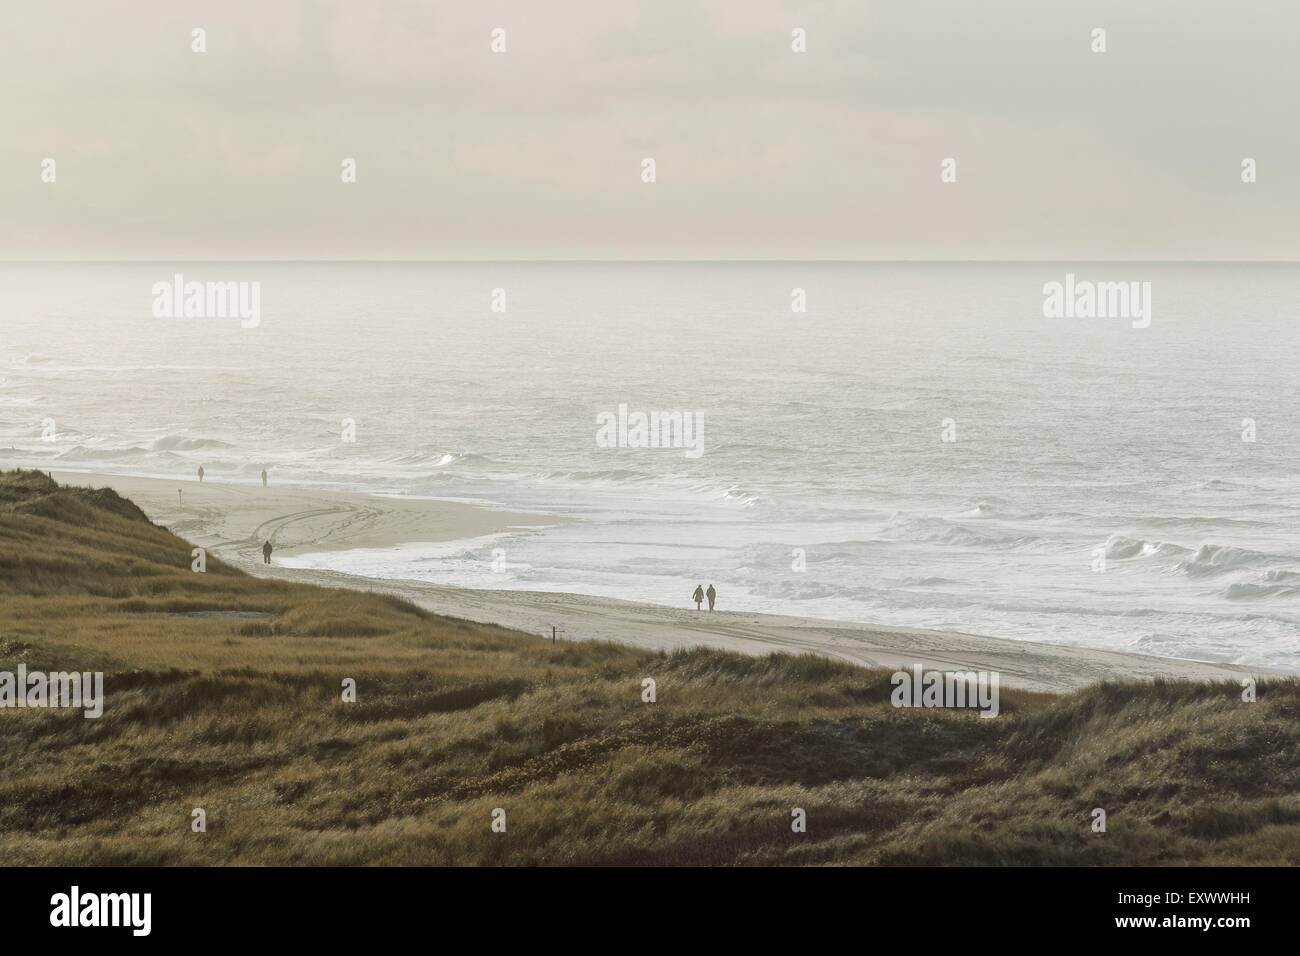 Dunes and beach at North Sea, List, Sylt, Schleswig-Holstein, Germany, Europe Stock Photo